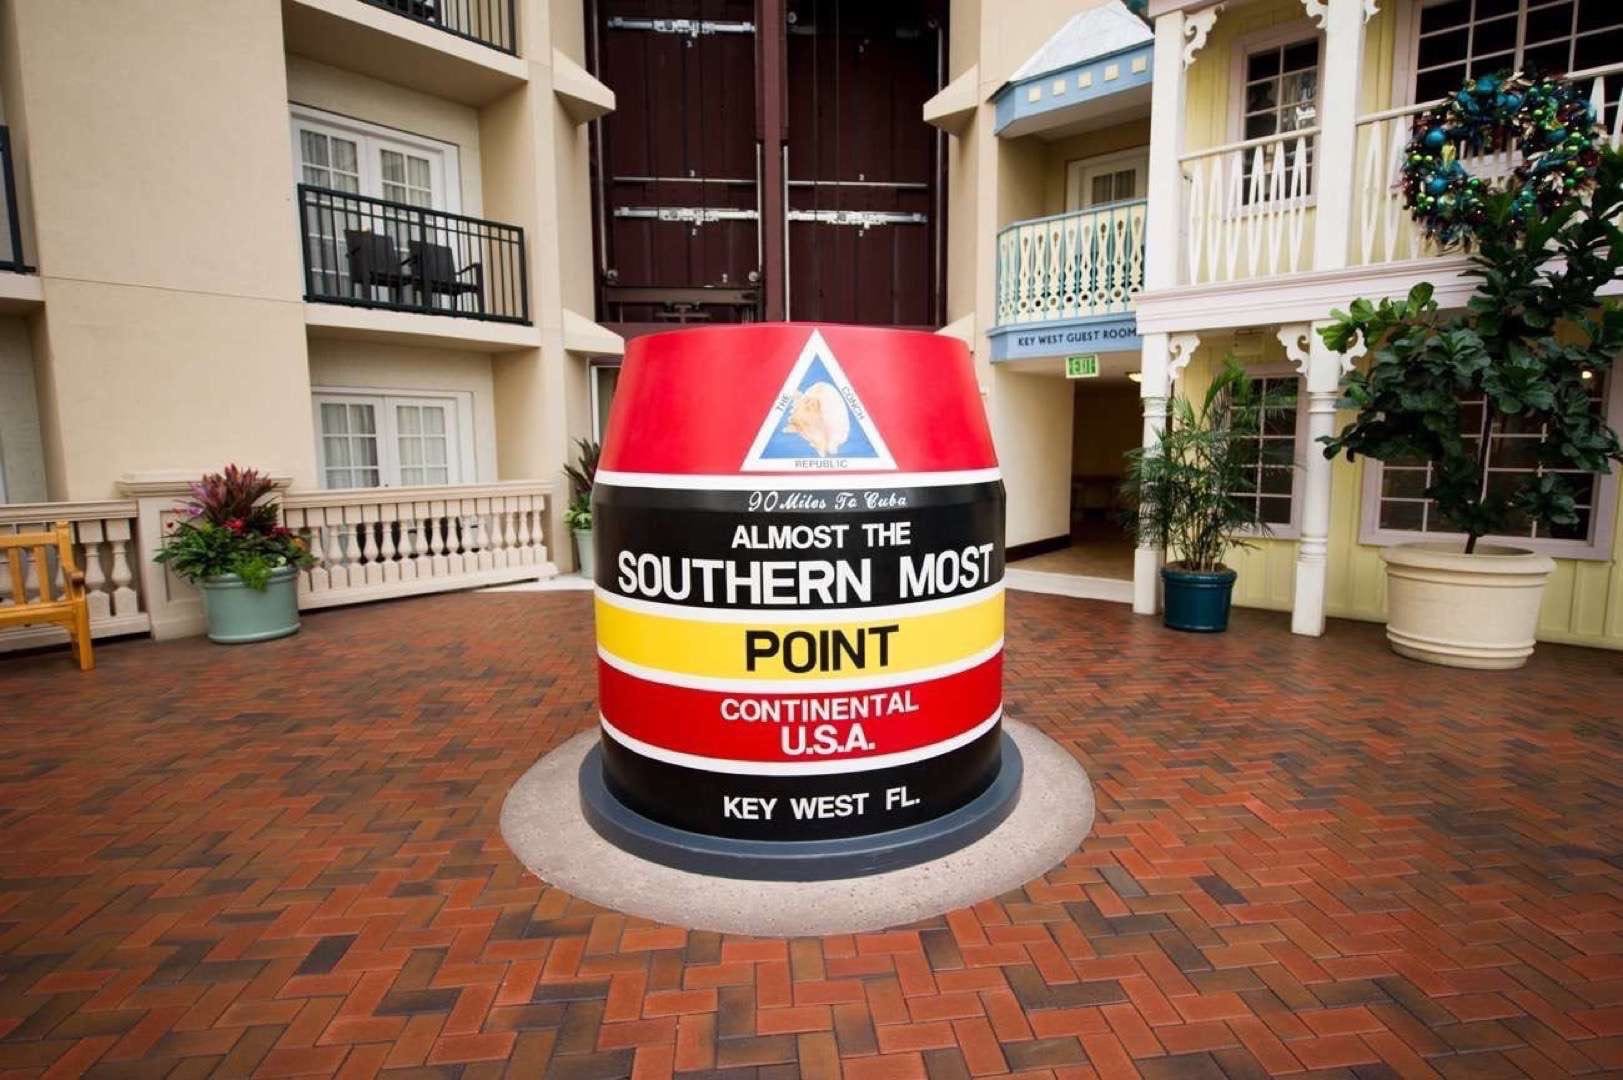 Gaylord Palms Resort and Convention Center Interior showing a marker for almost the southern most point in USA.